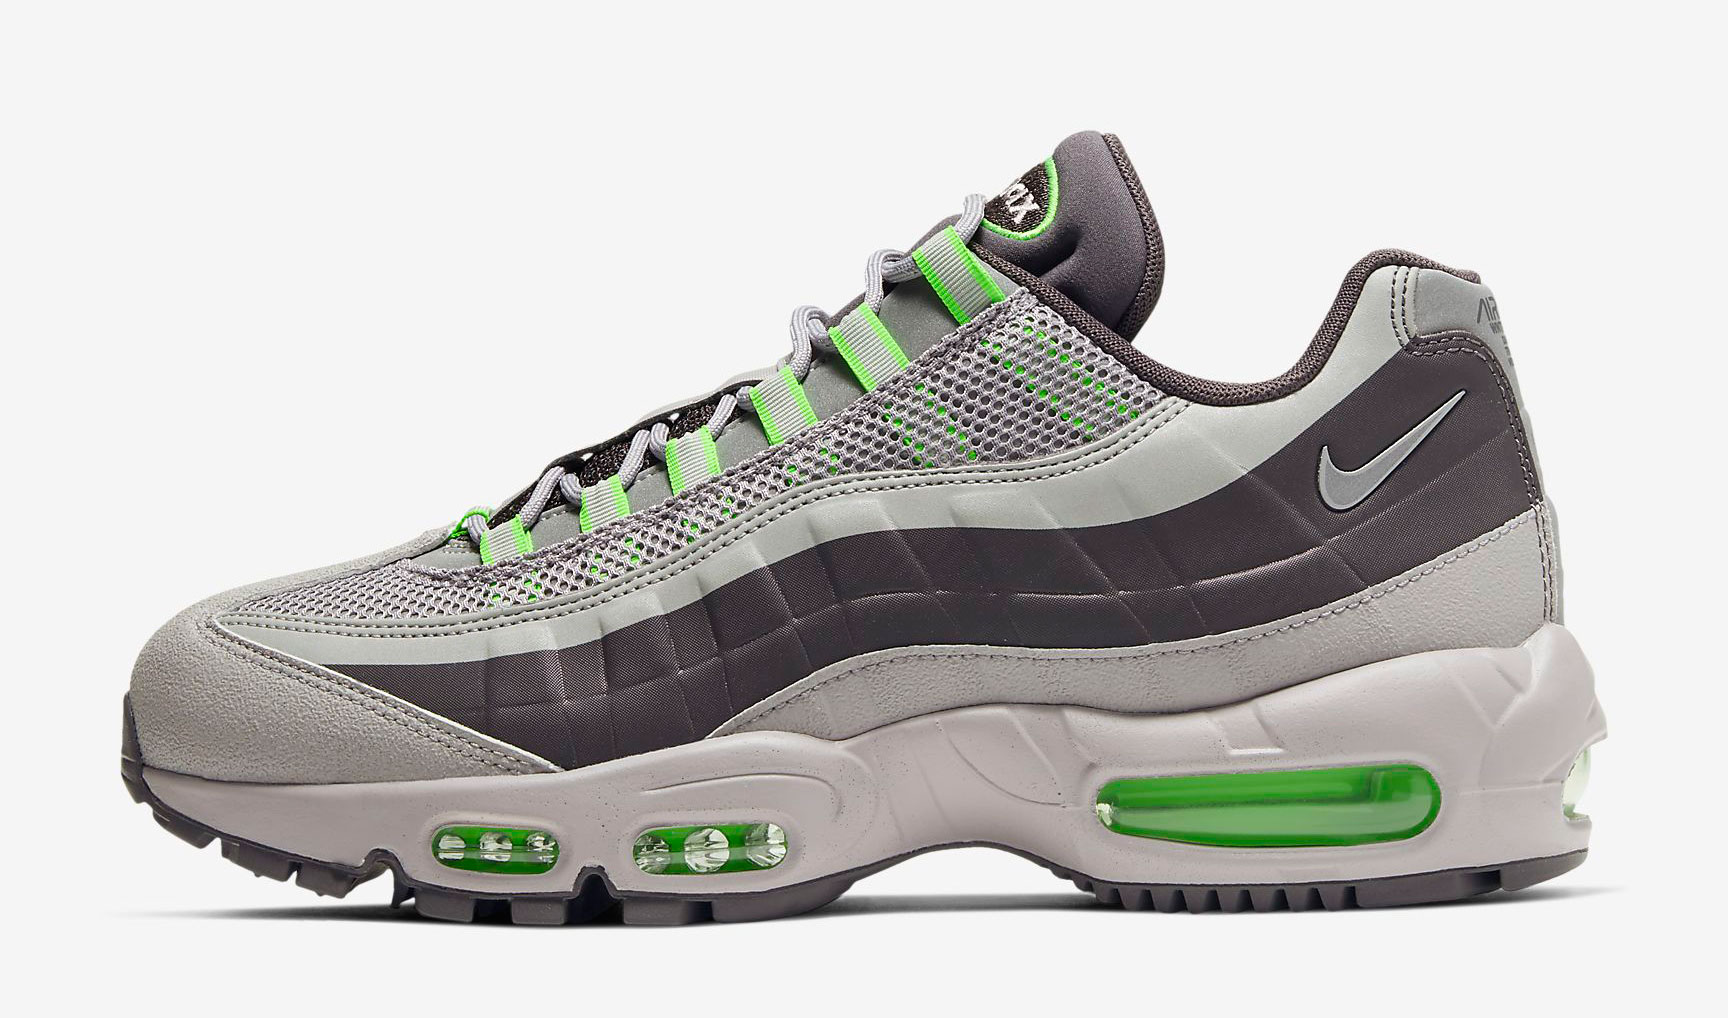 nike-air-max-95-utility-thunder-grey-electric-green-release-date